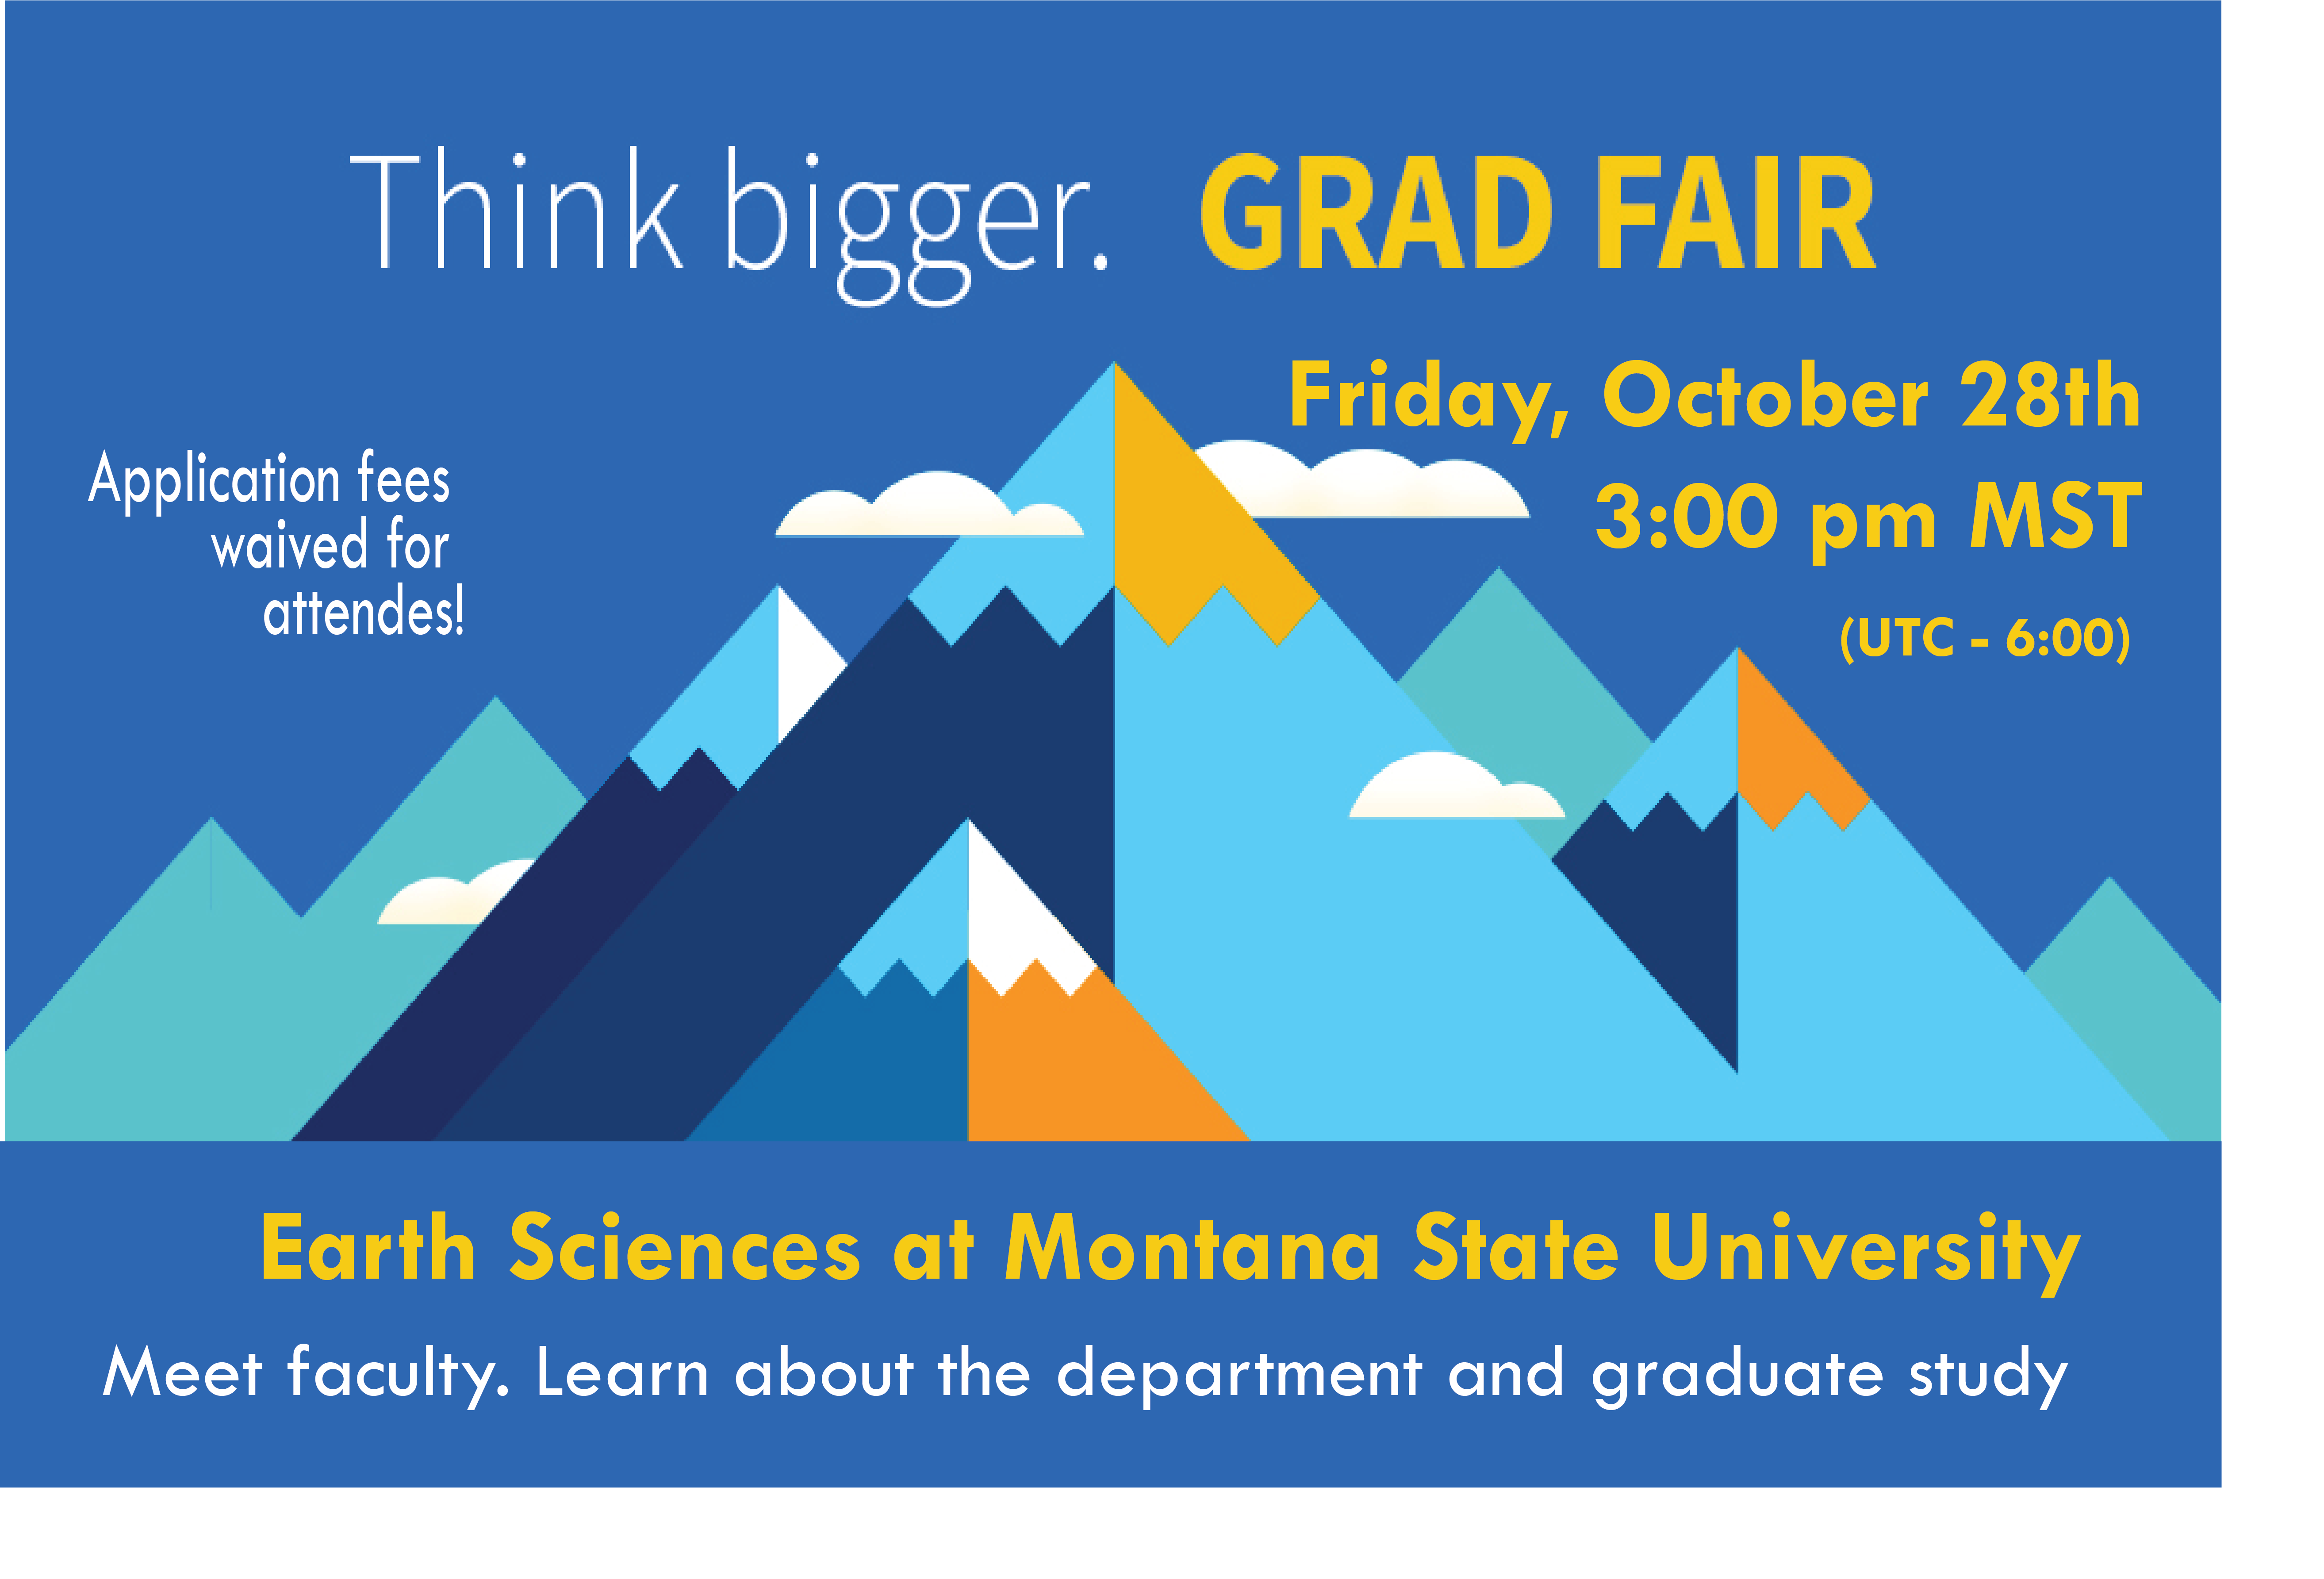 Come learn about Graduate Studies in Earth Sciences at the 2022 Grad Fair. October 28th, 3 pm MST.